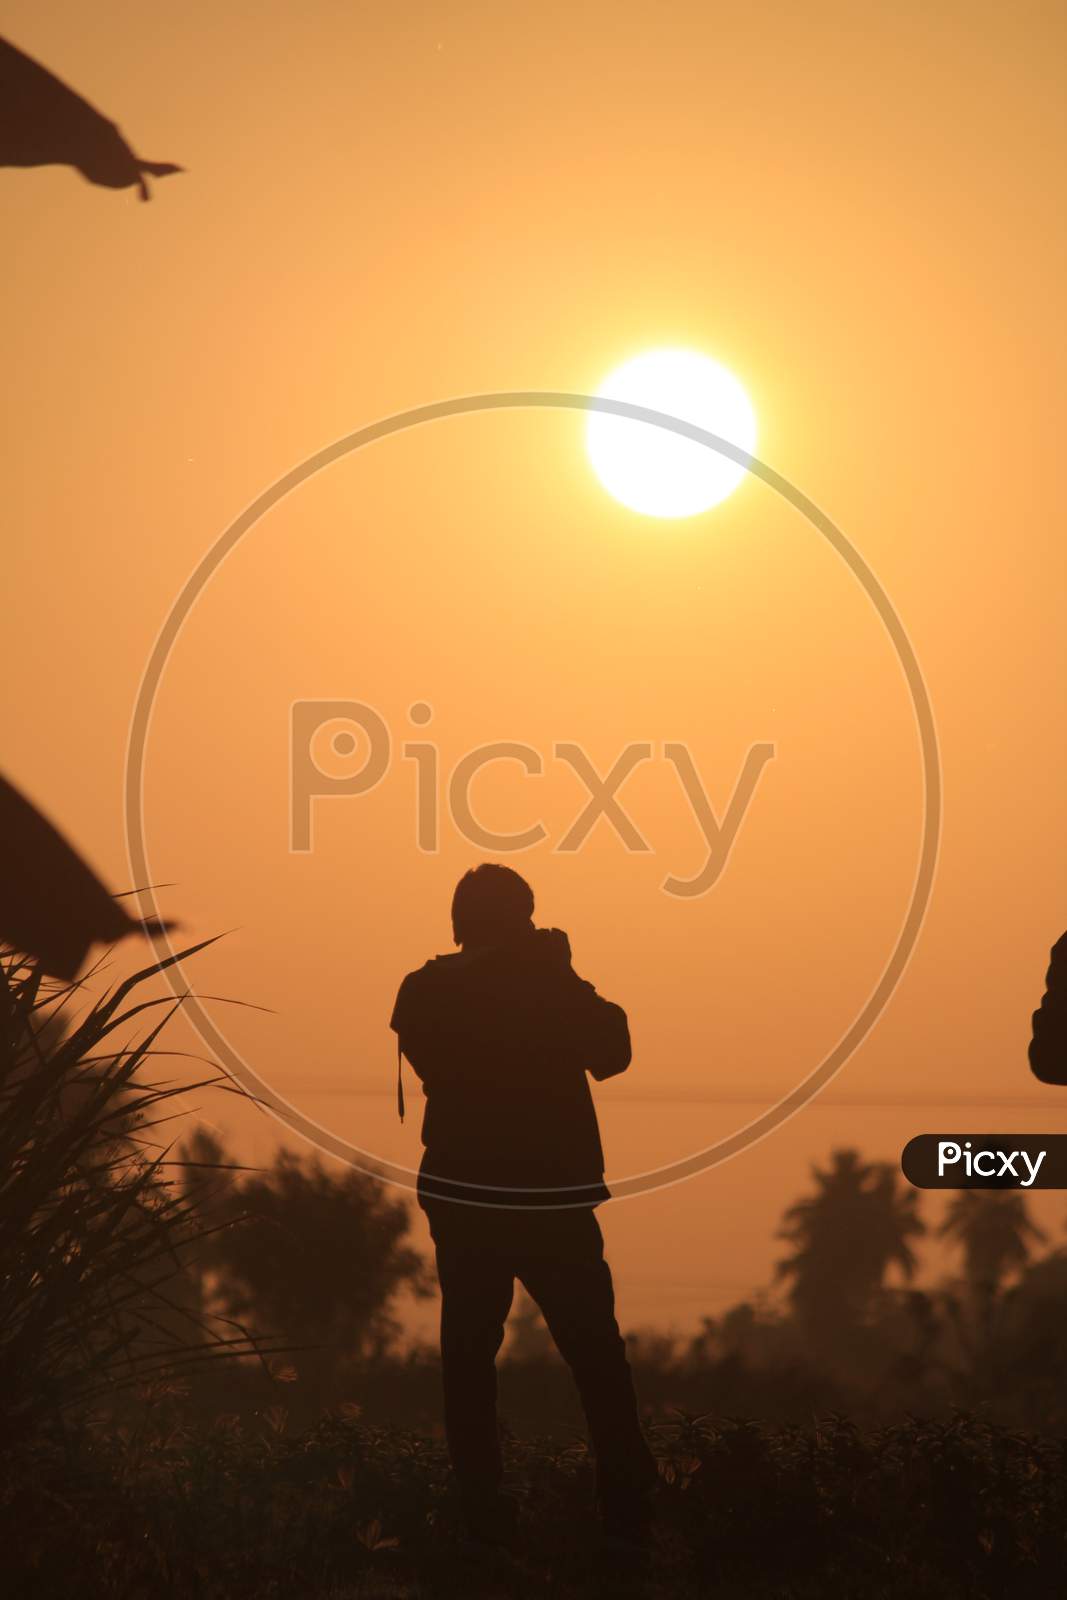 Silhouette Image Of Man Taking Photograph Of The Sunrise. Silhouette Picture Of Man In The Outdoor